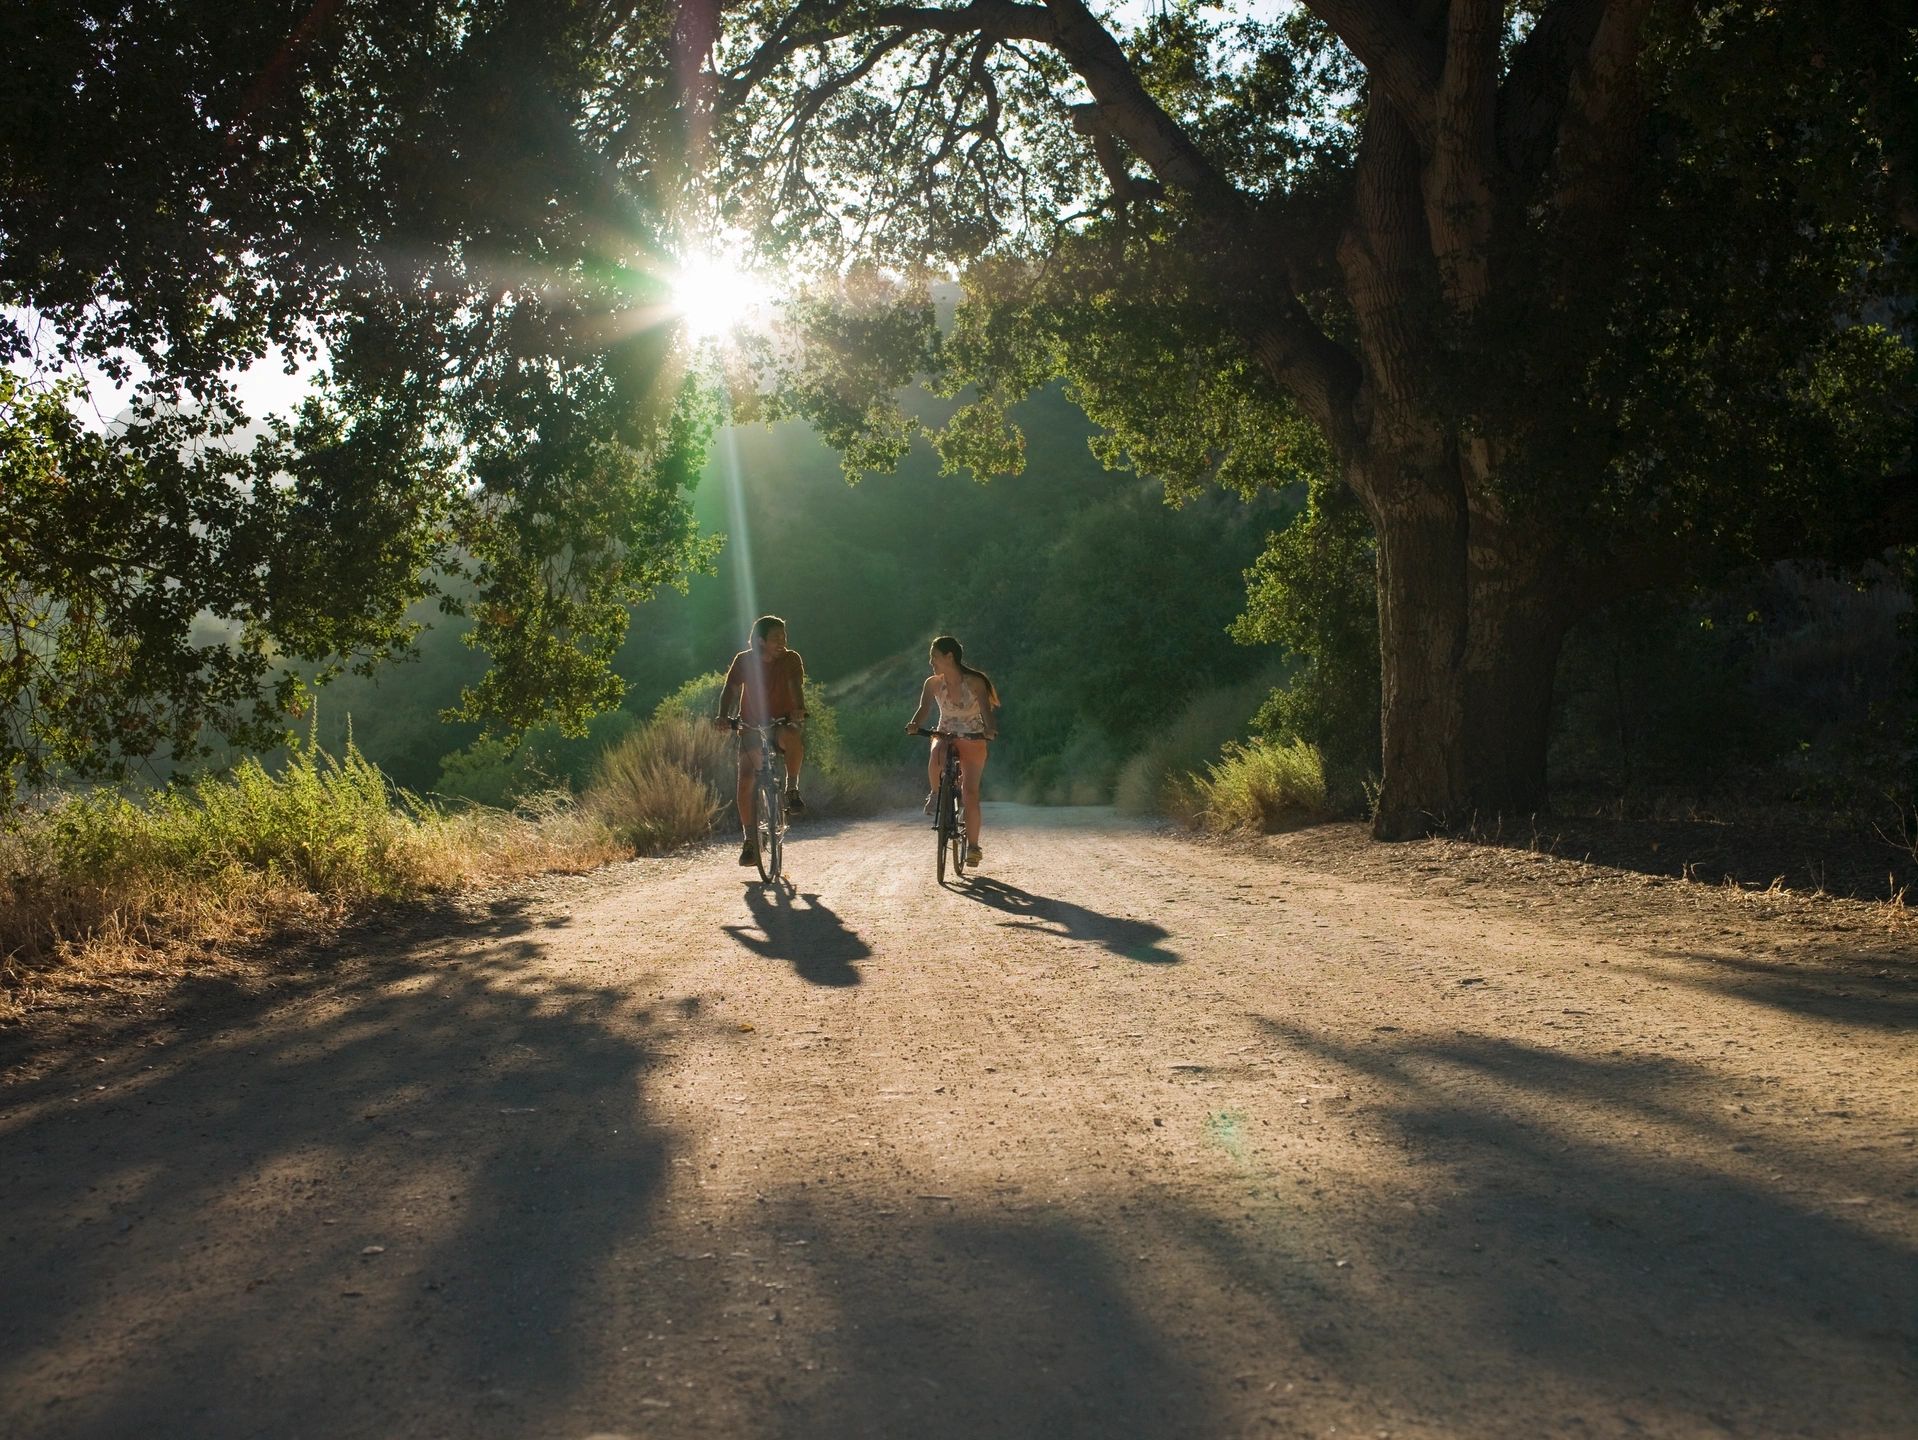 Man and woman riding pedal bikes down dirt road in wooded area on sunny day